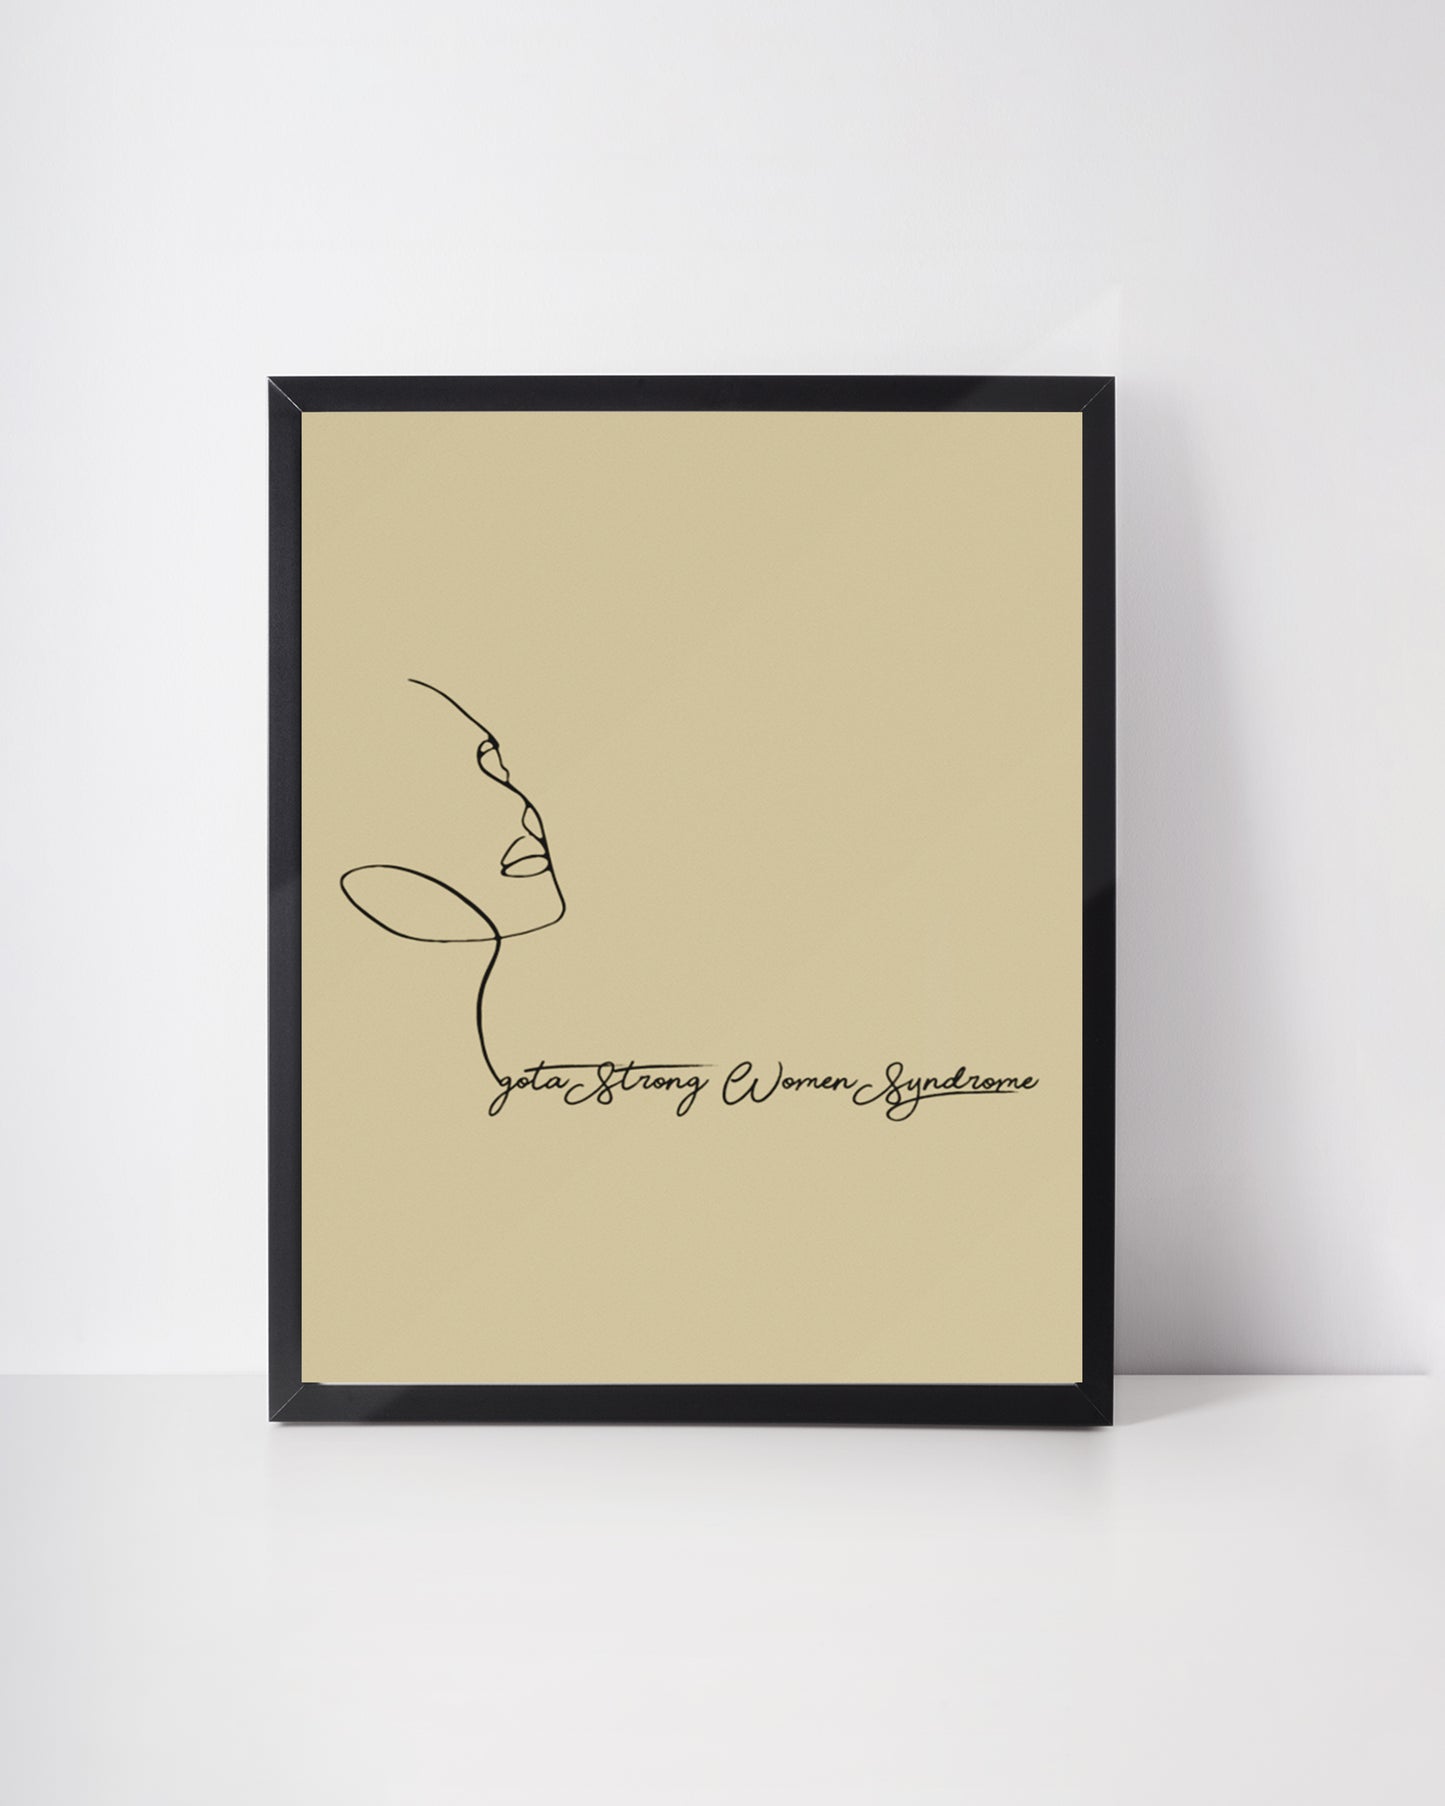 I got a strong women syndrome printed posters framed - Muselot